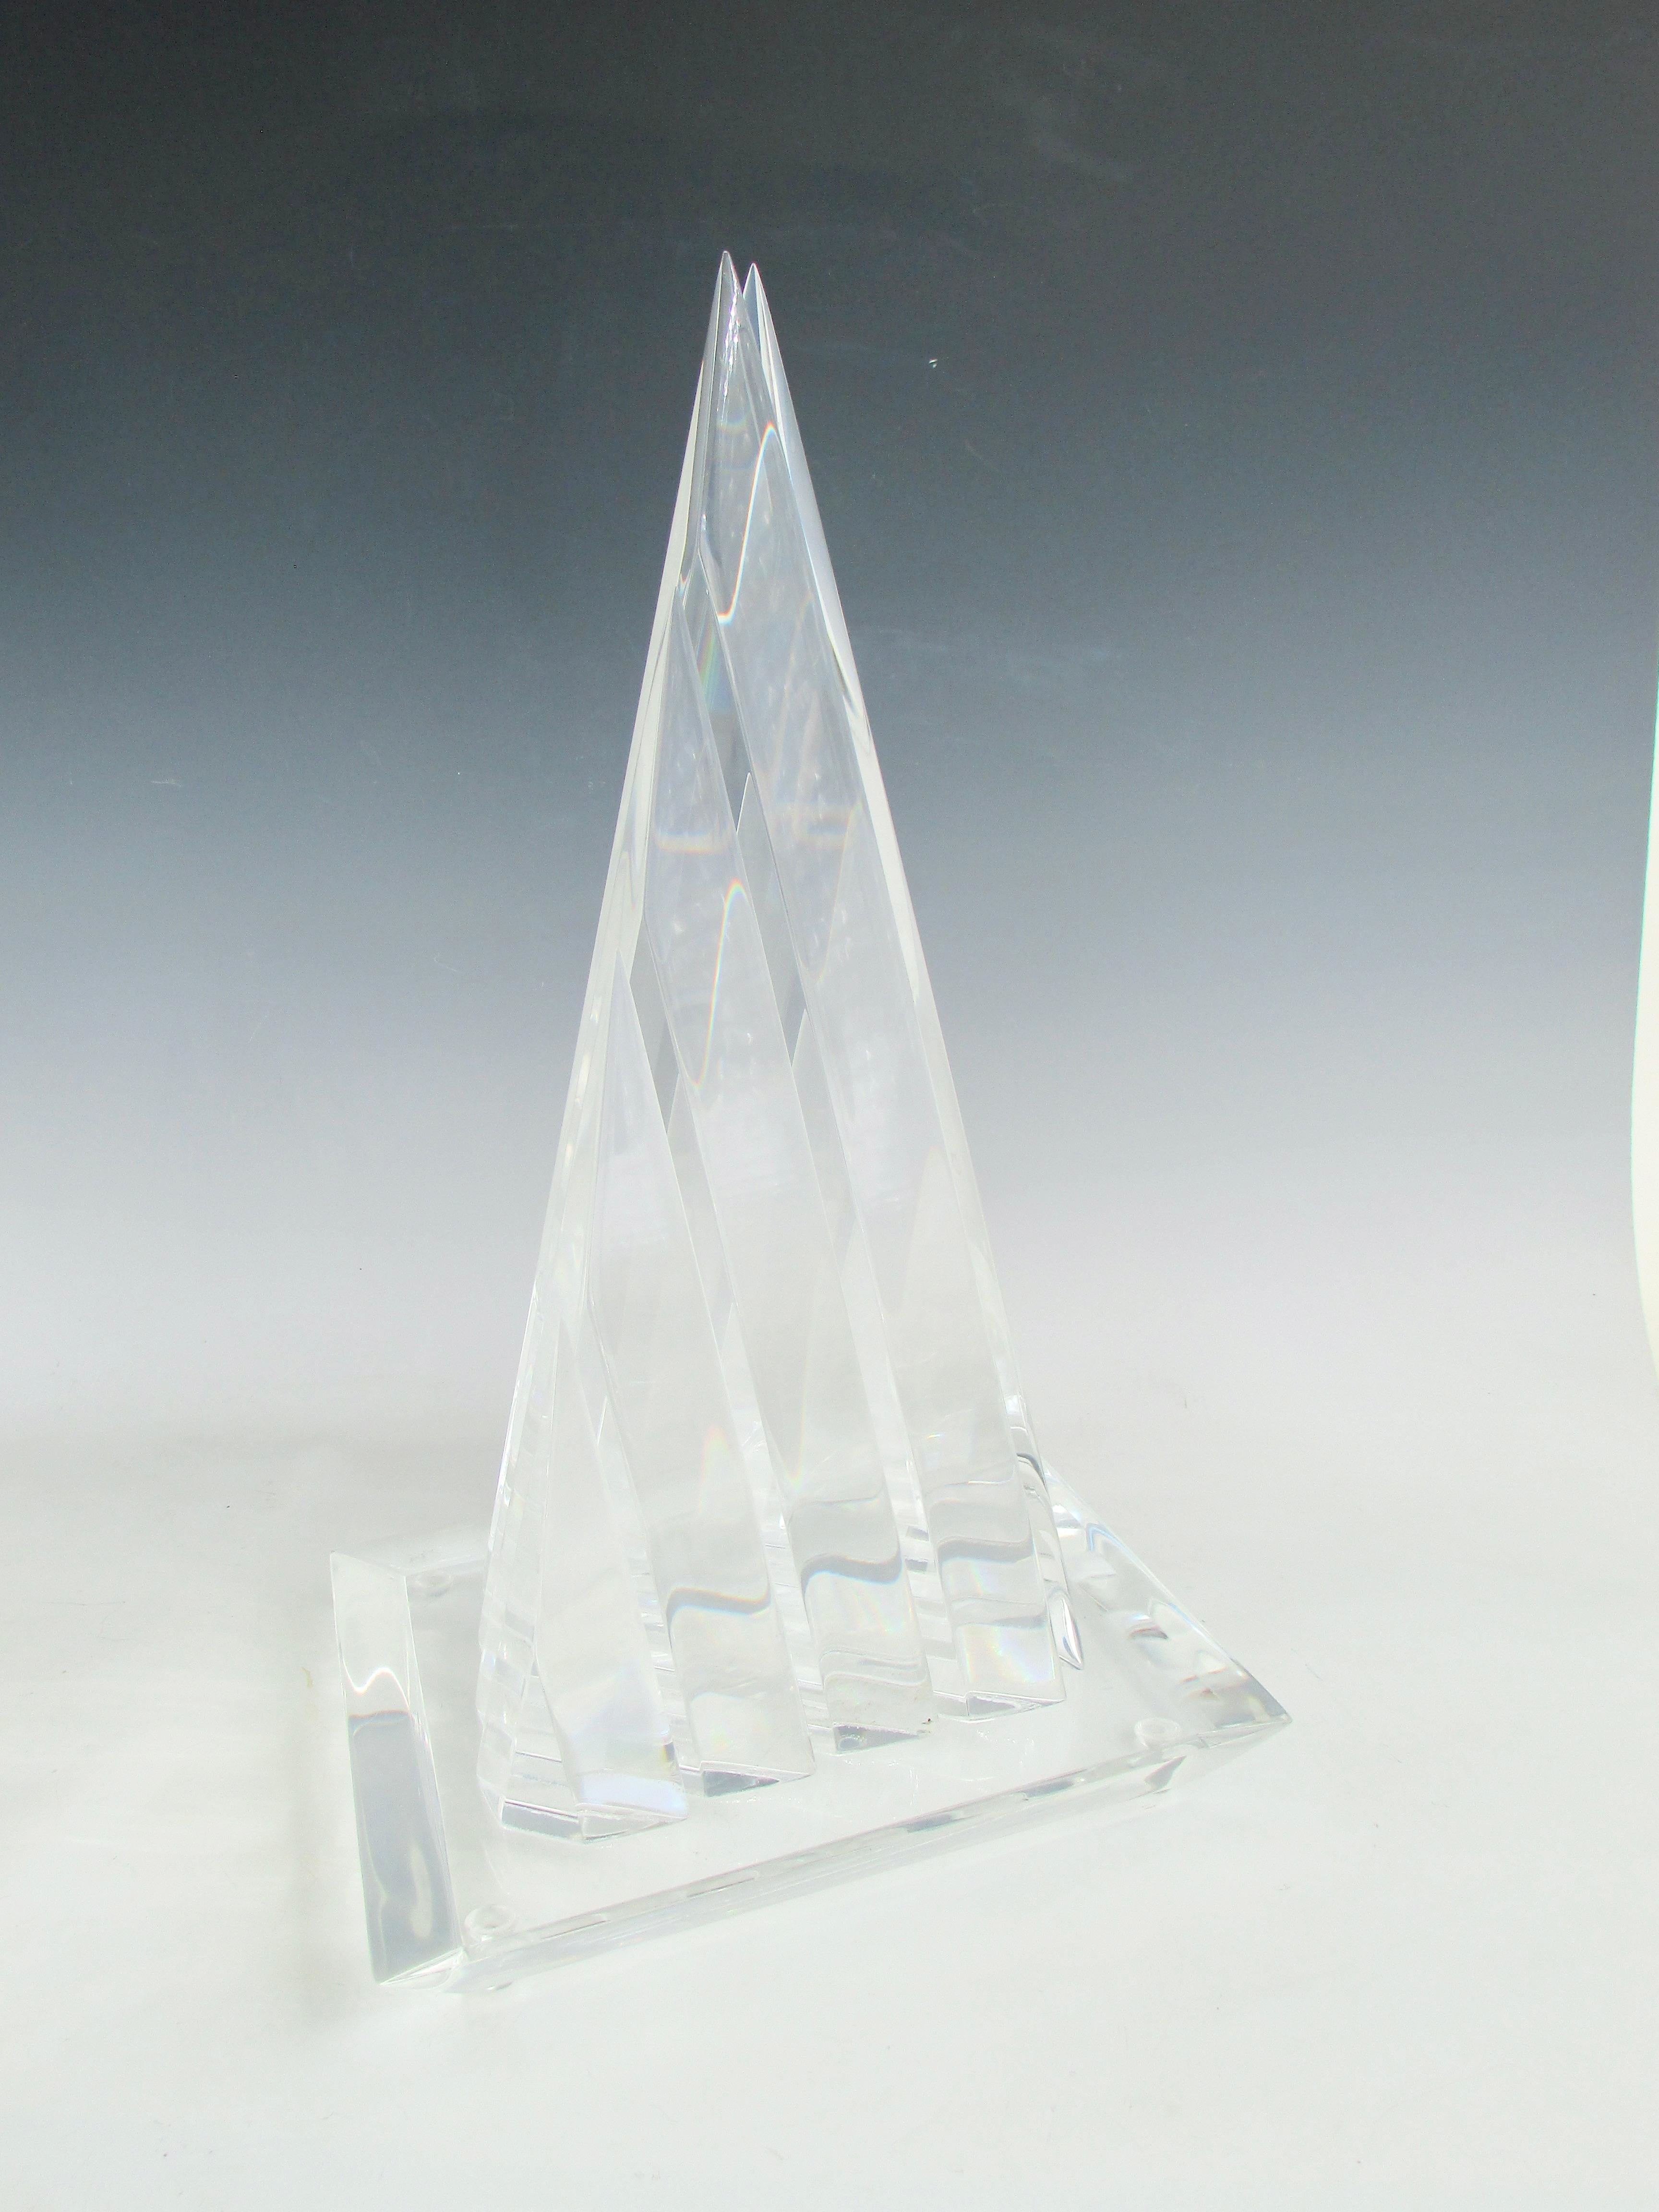 Hivo Van Teal Segmented Lucite Pyramid, Triangle Sculpture For Sale 2